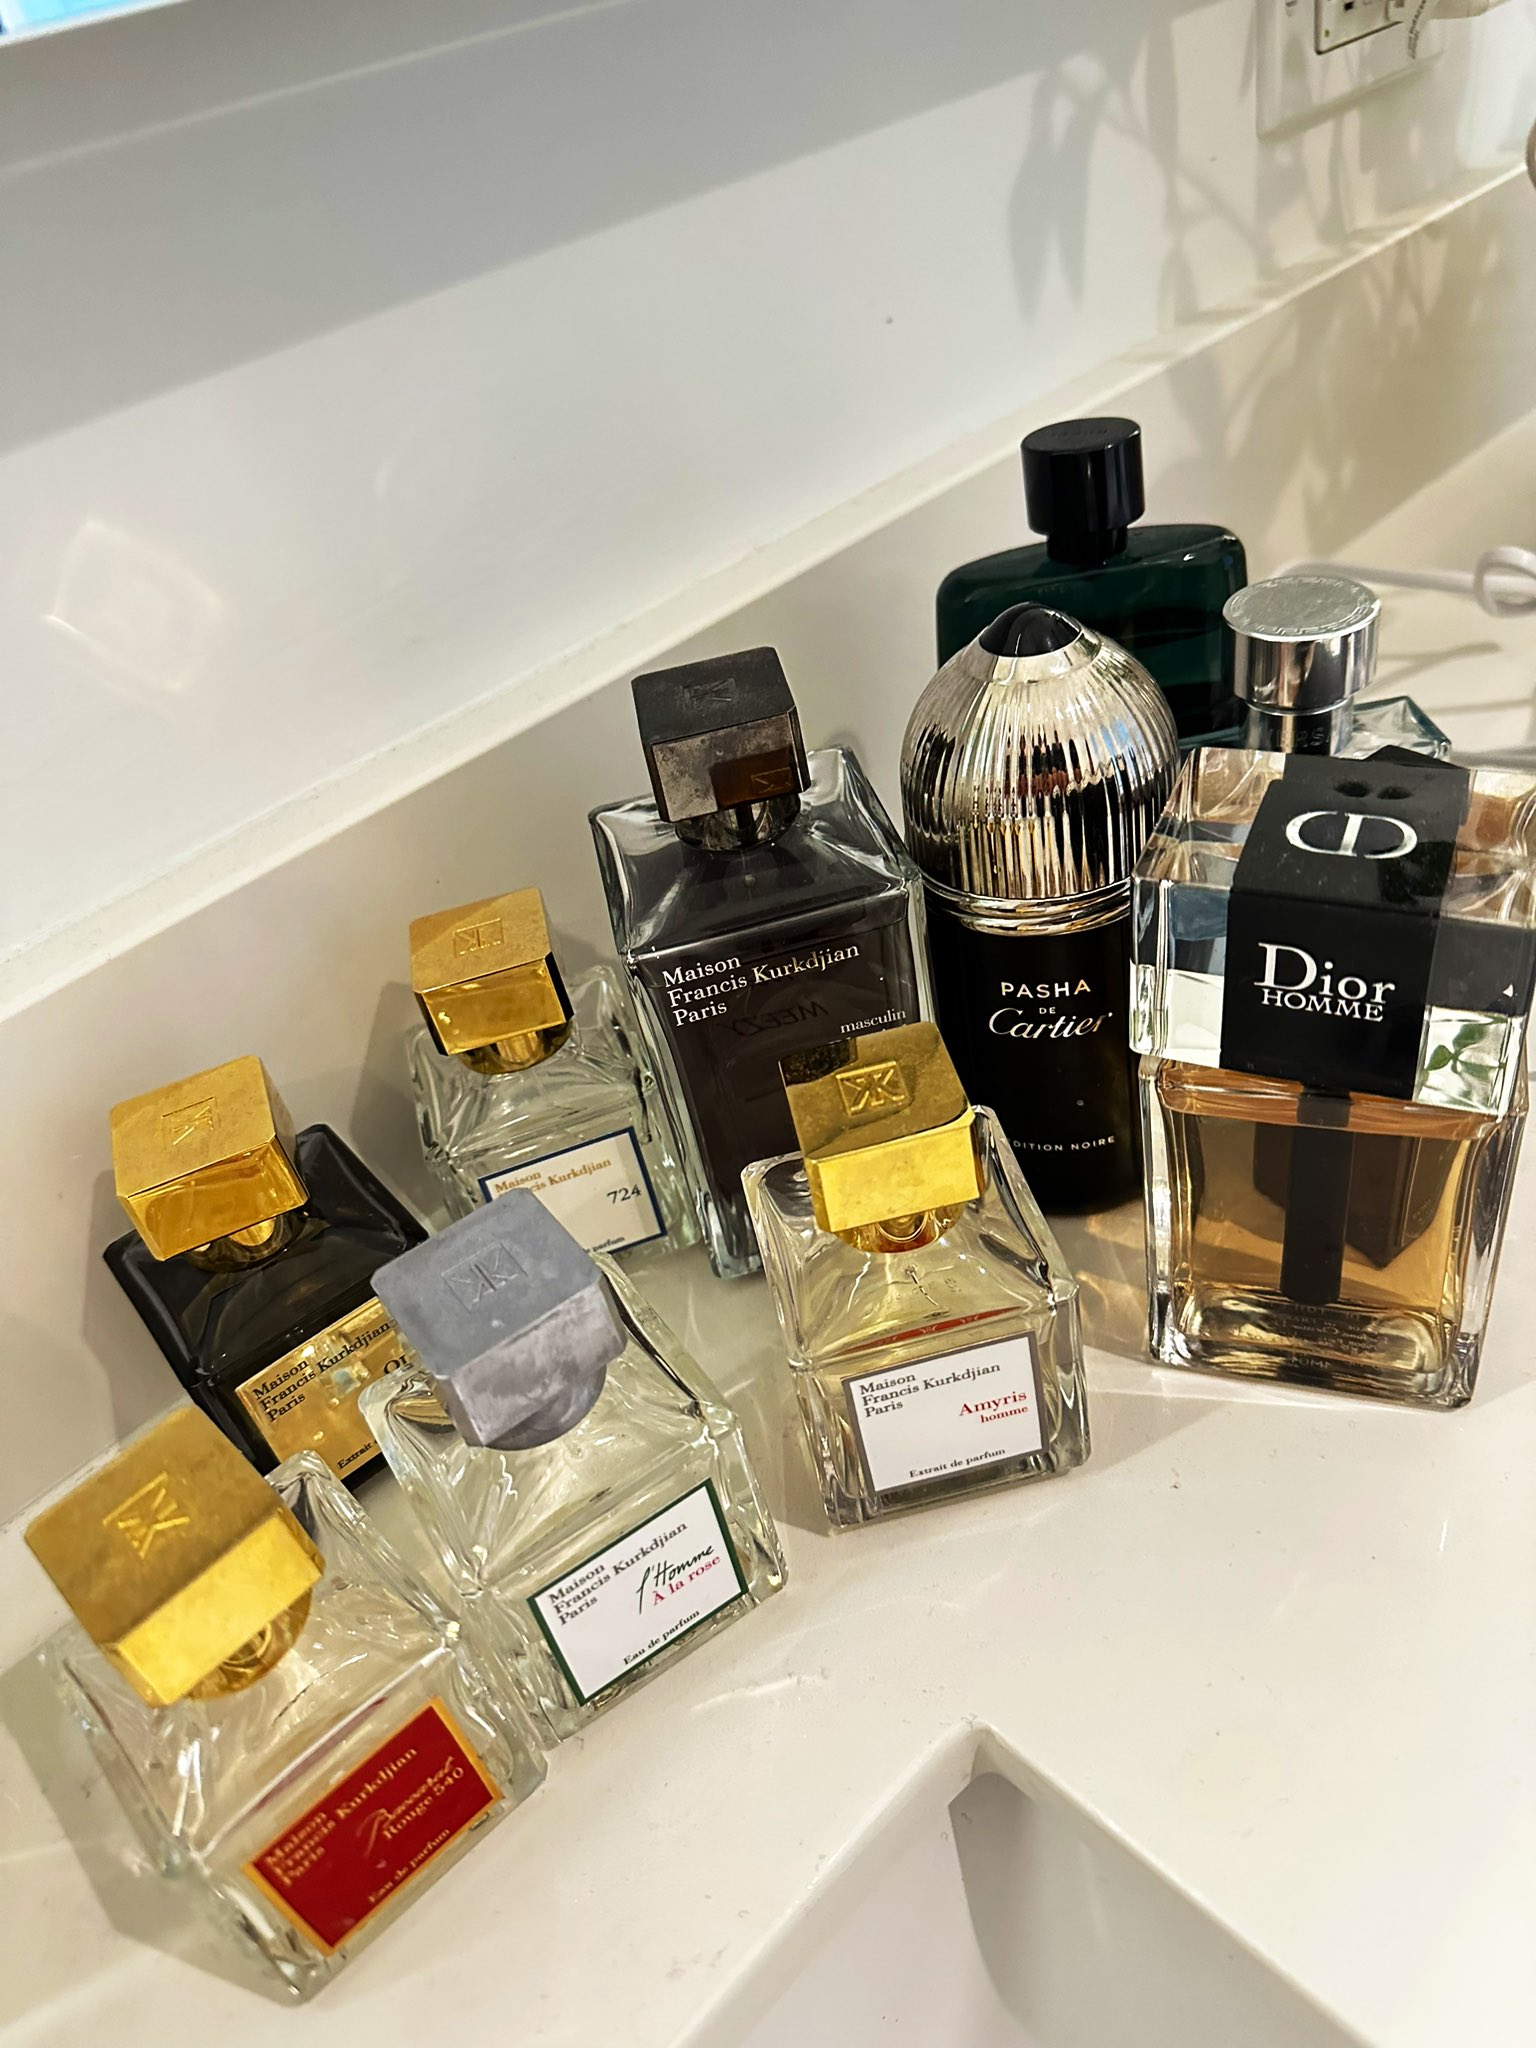 Meezy on X: Some of my favorite scents here fellas. What's not shown in the  pic is in my other crib that I love: Bleu Chanel, Creed Aventus &  Sauavge ofc.  /